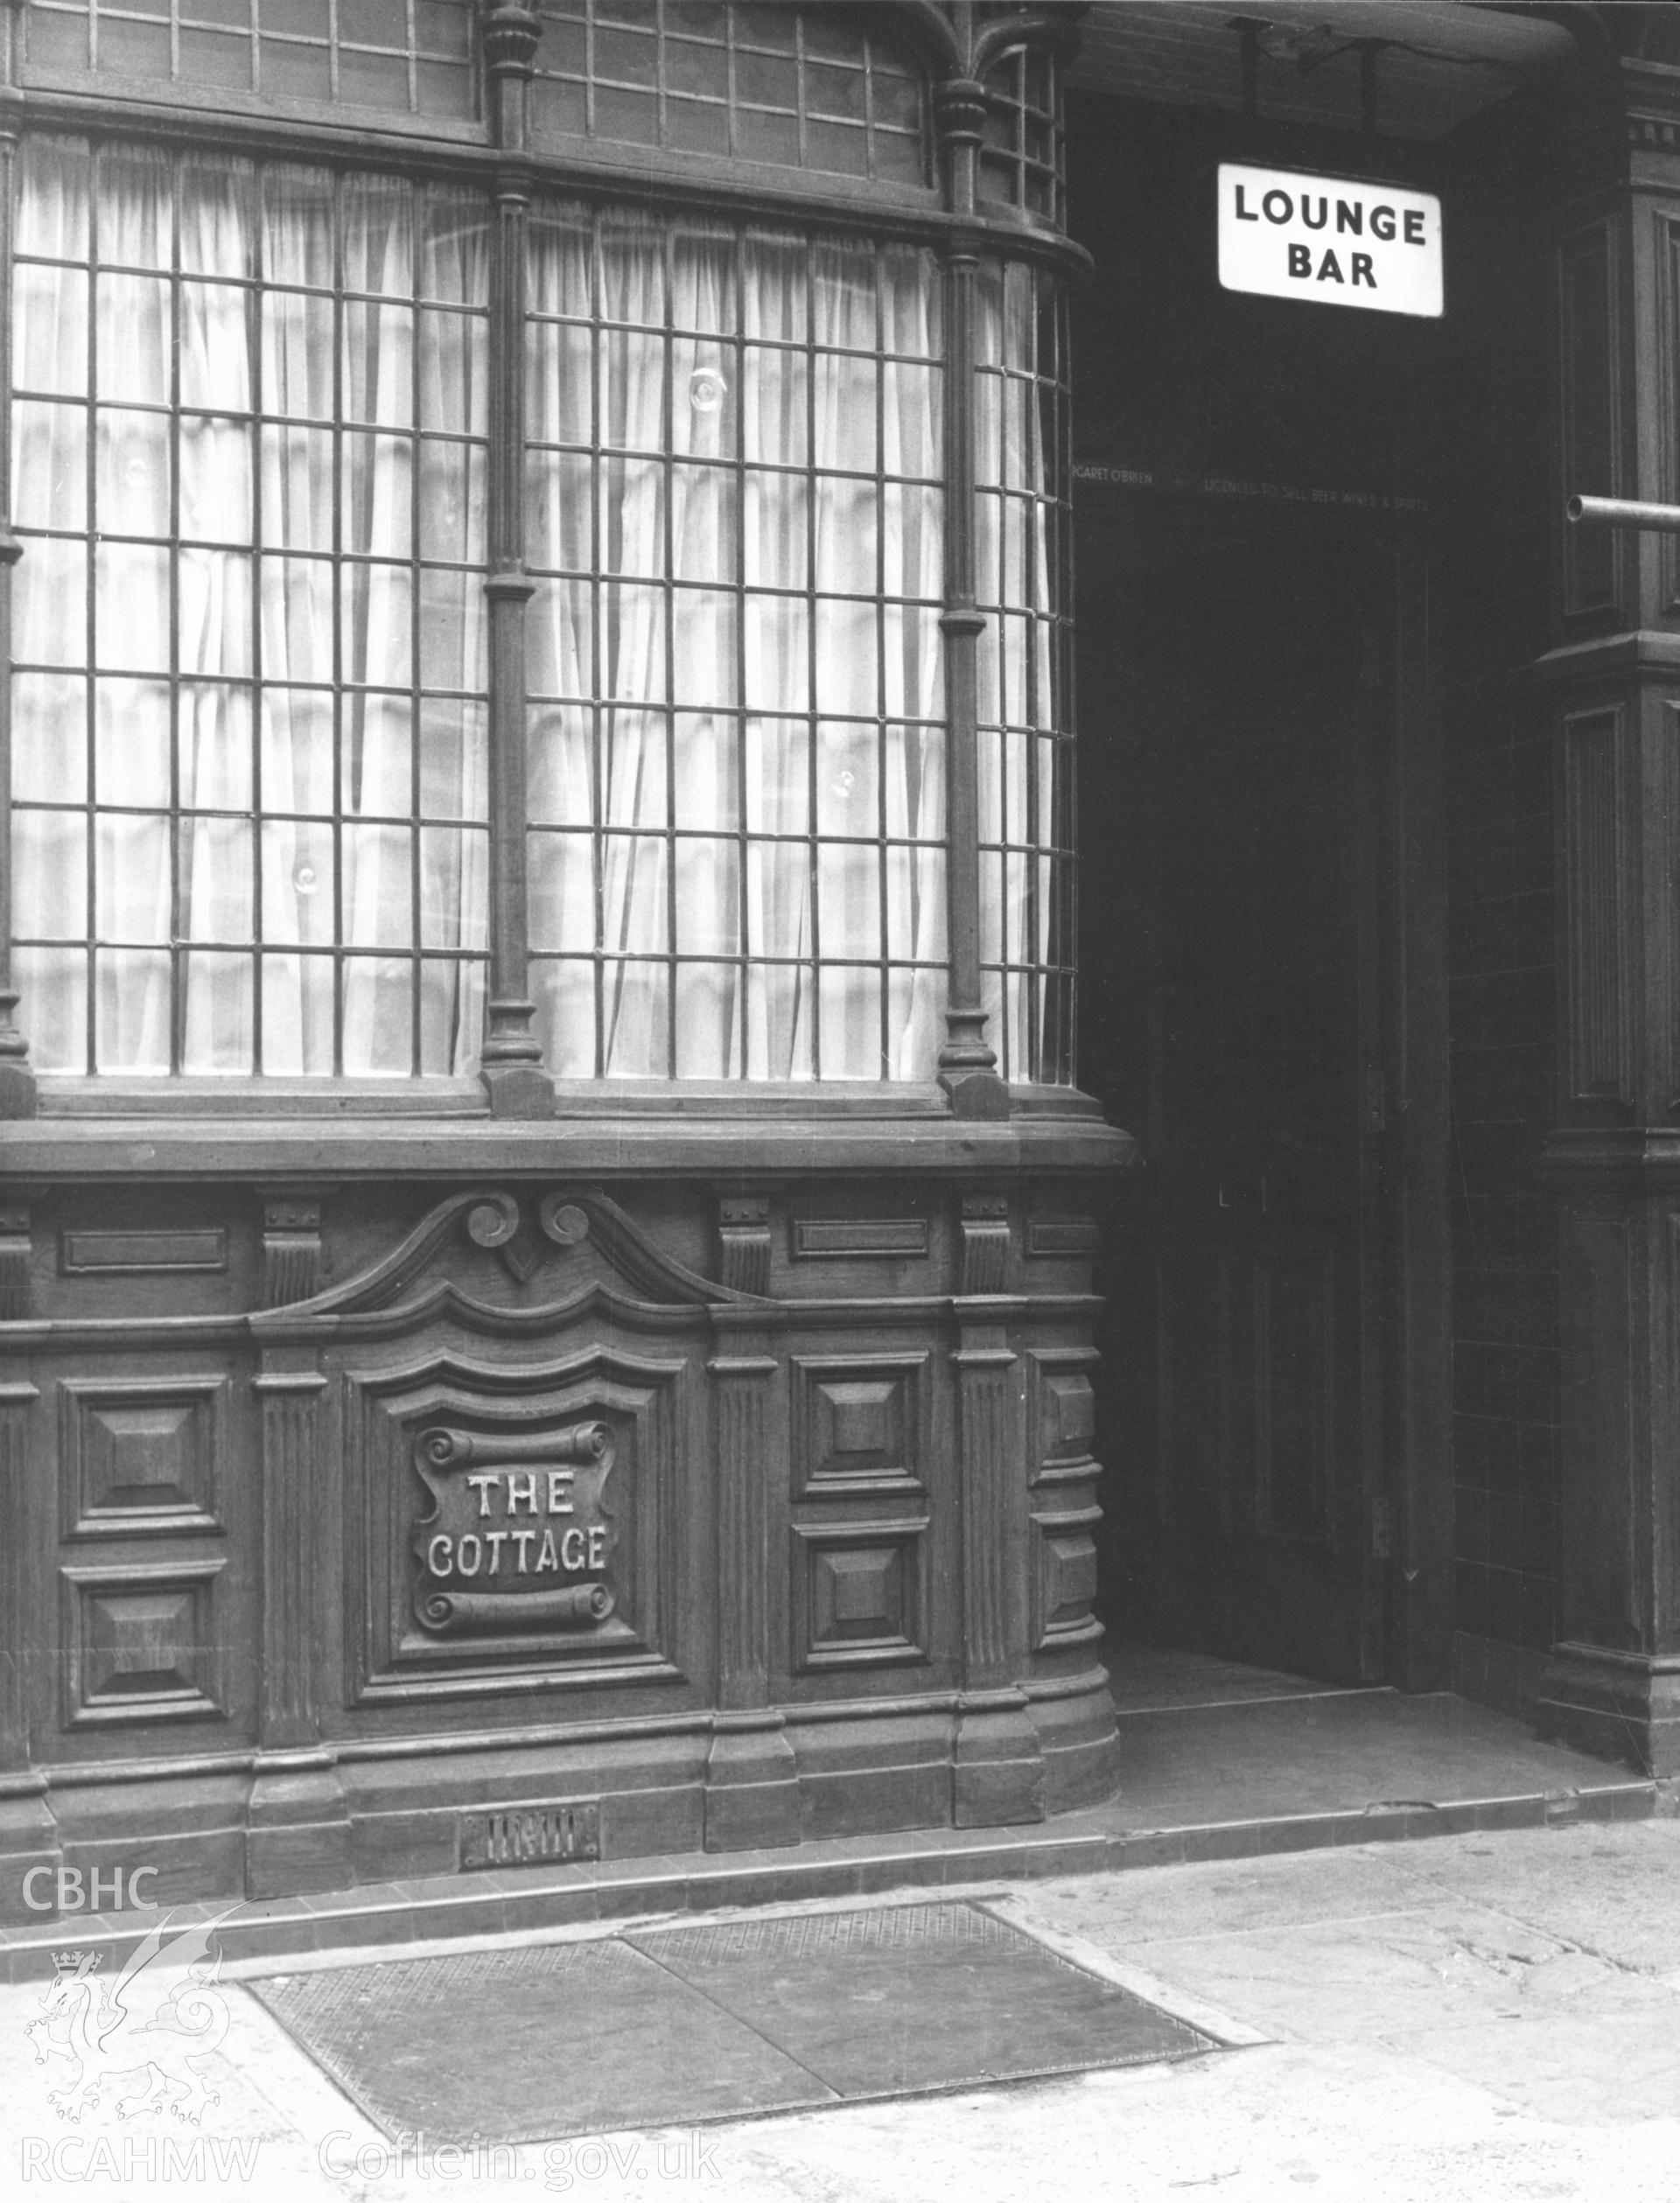 1 b/w print showing doorway of the The Cottage Public House, 25 St Mary Street, Cardiff; collated by the former Central Office of Information.